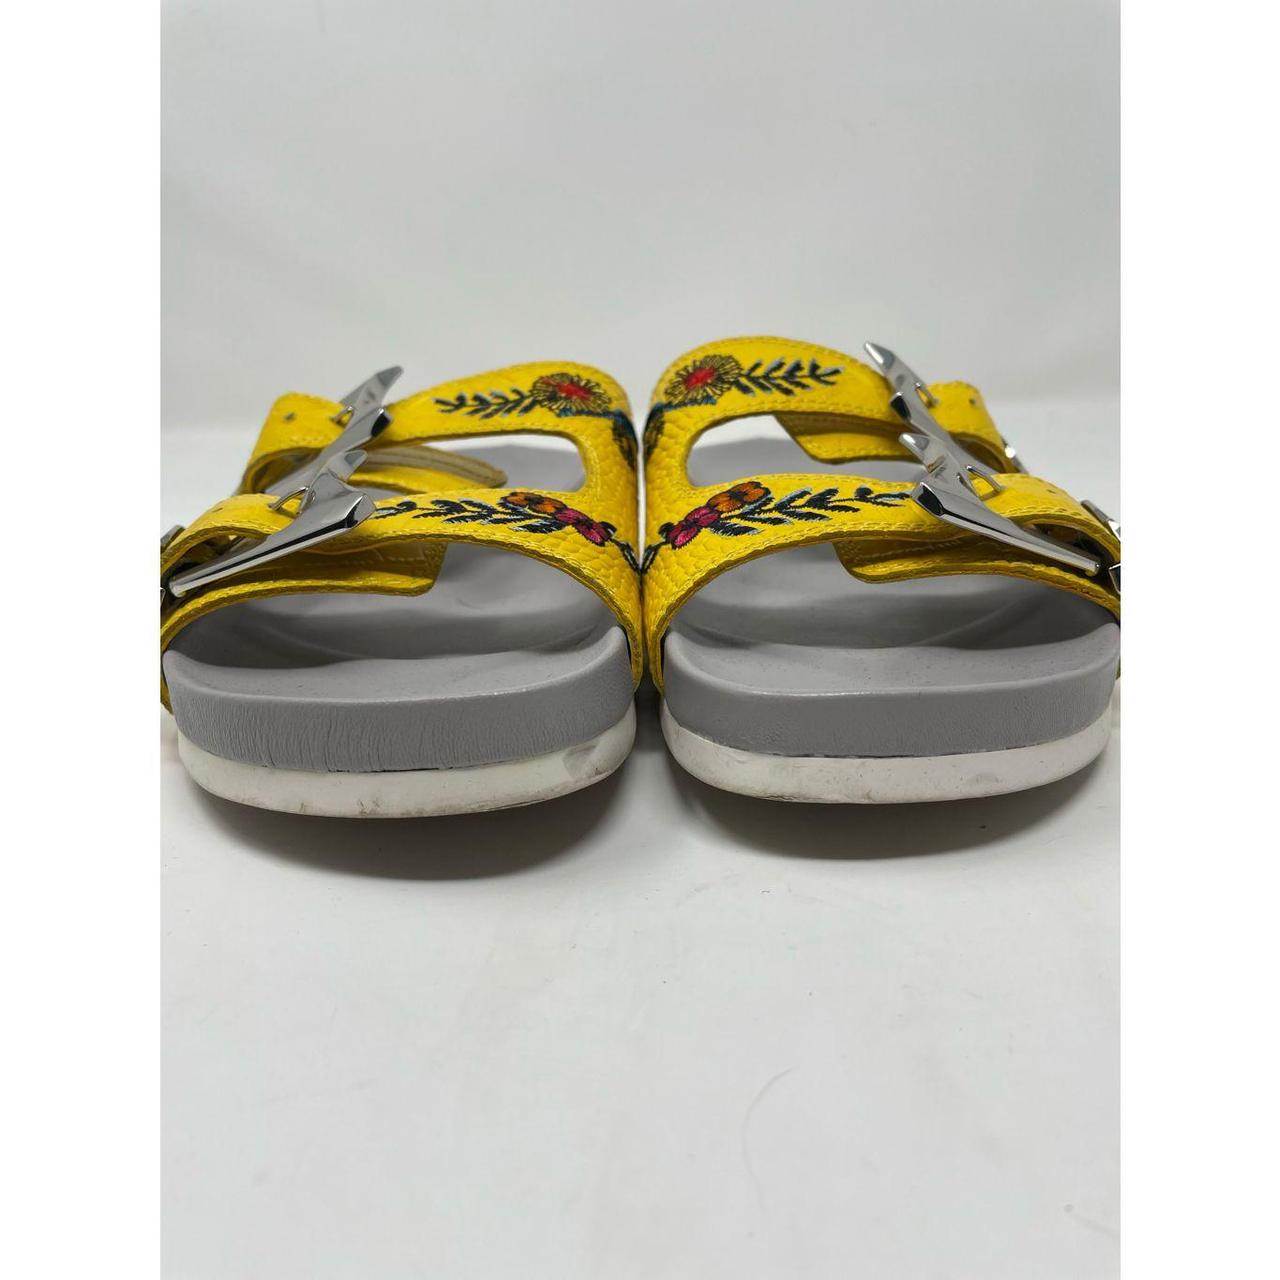 Product Image 4 - Color/Material: Yellow Embroidered Crocco Print